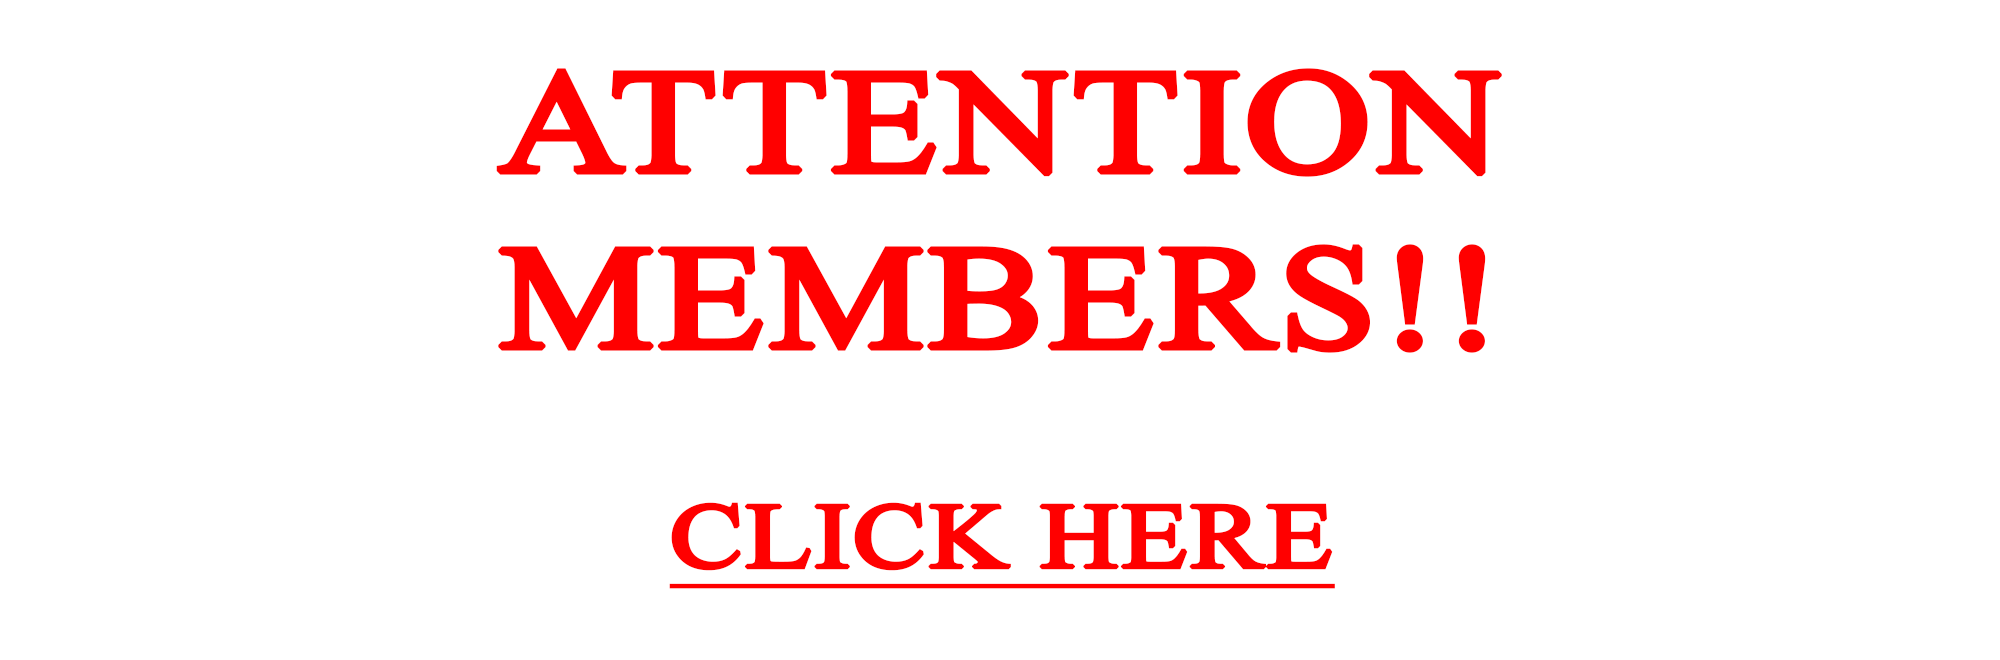 Attention Members! Click Here